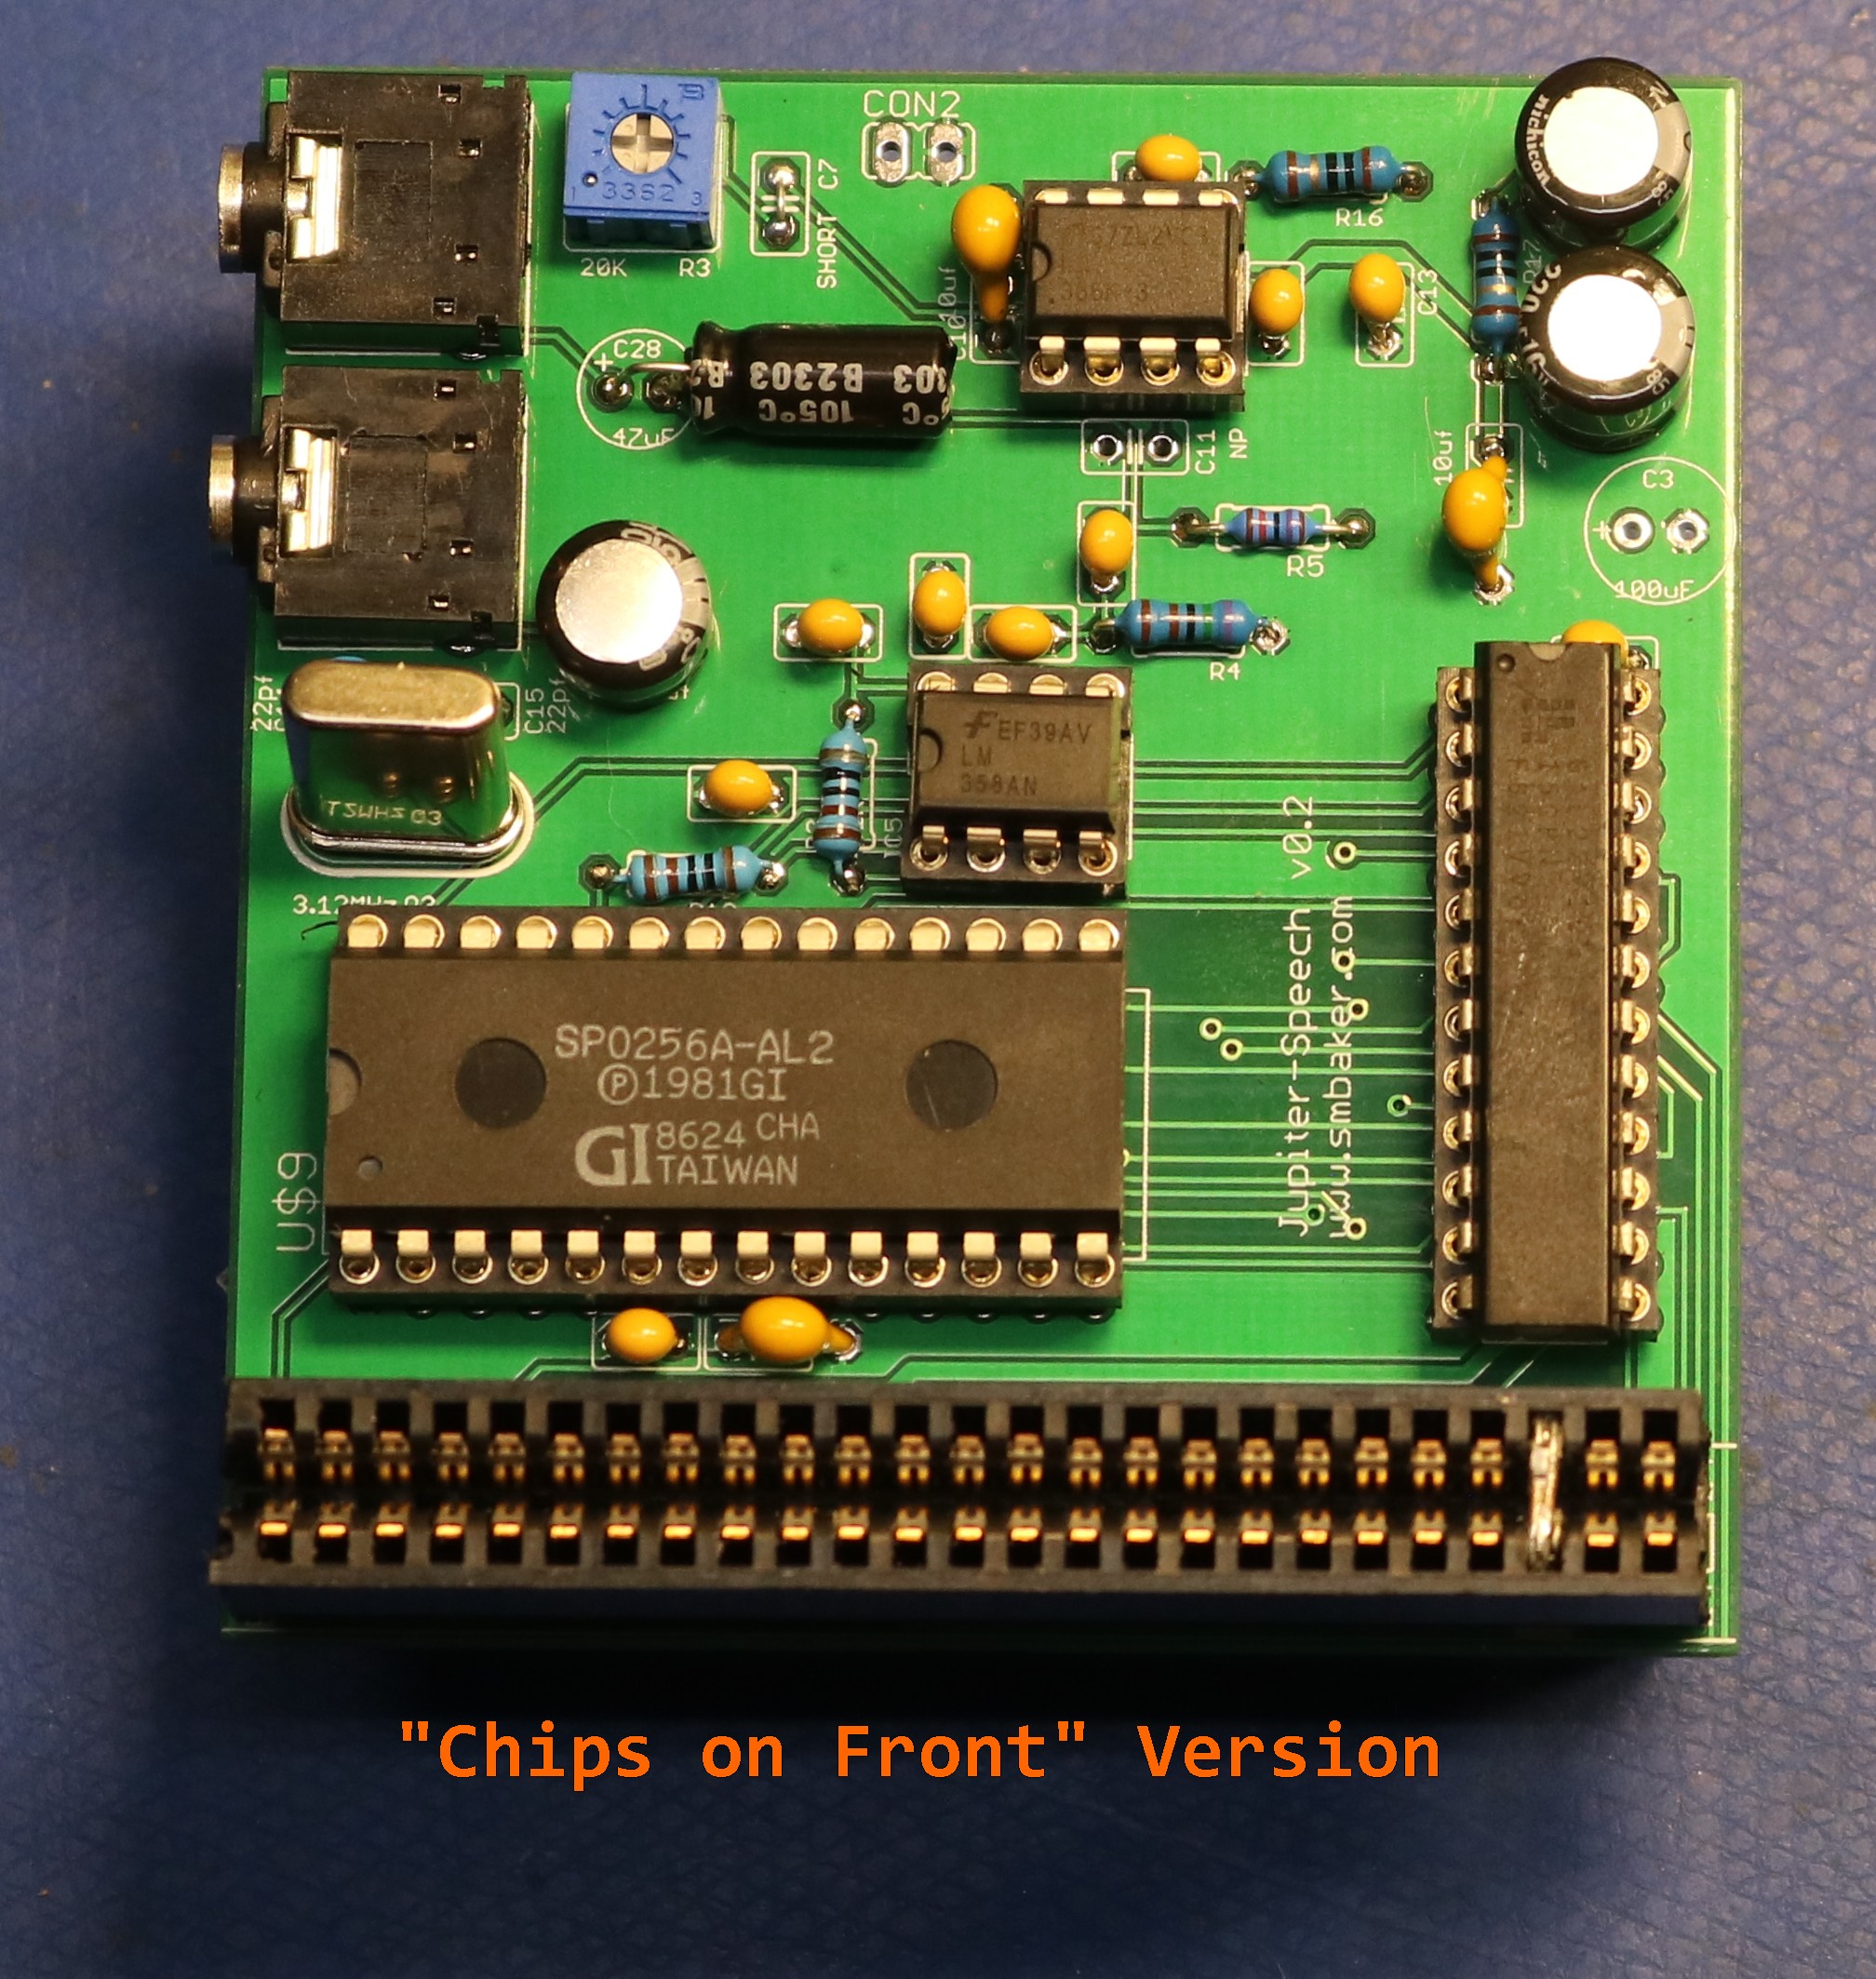 Ready for PIC - 40 Pin PIC Development Board with PIC18F45K22